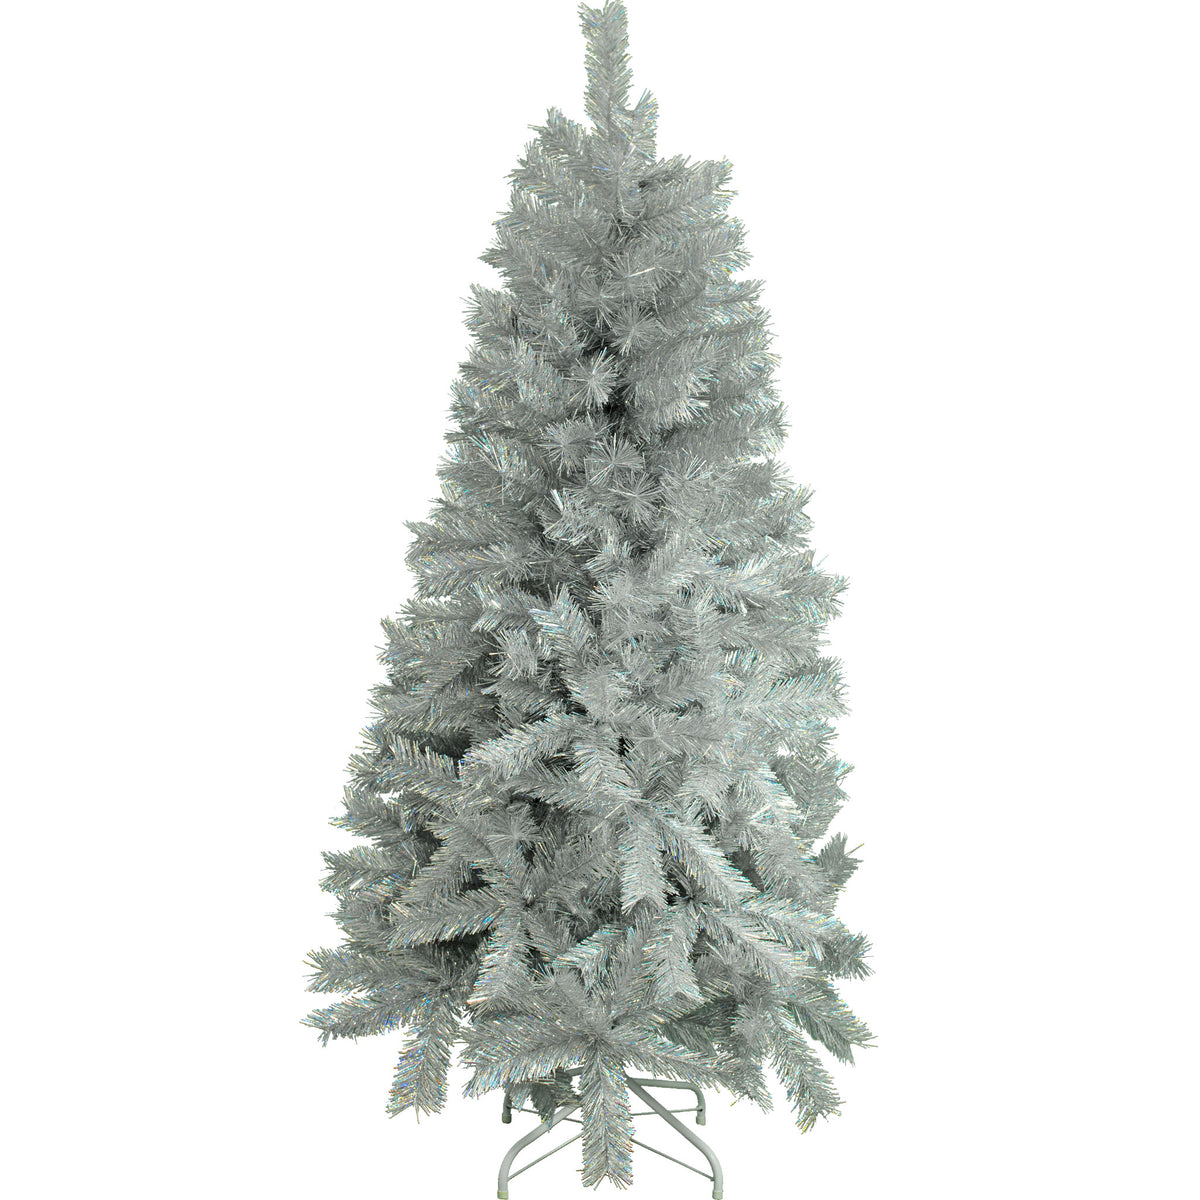 The 5 Foot Tall Luxe Christmas Silver Tinsel Tree